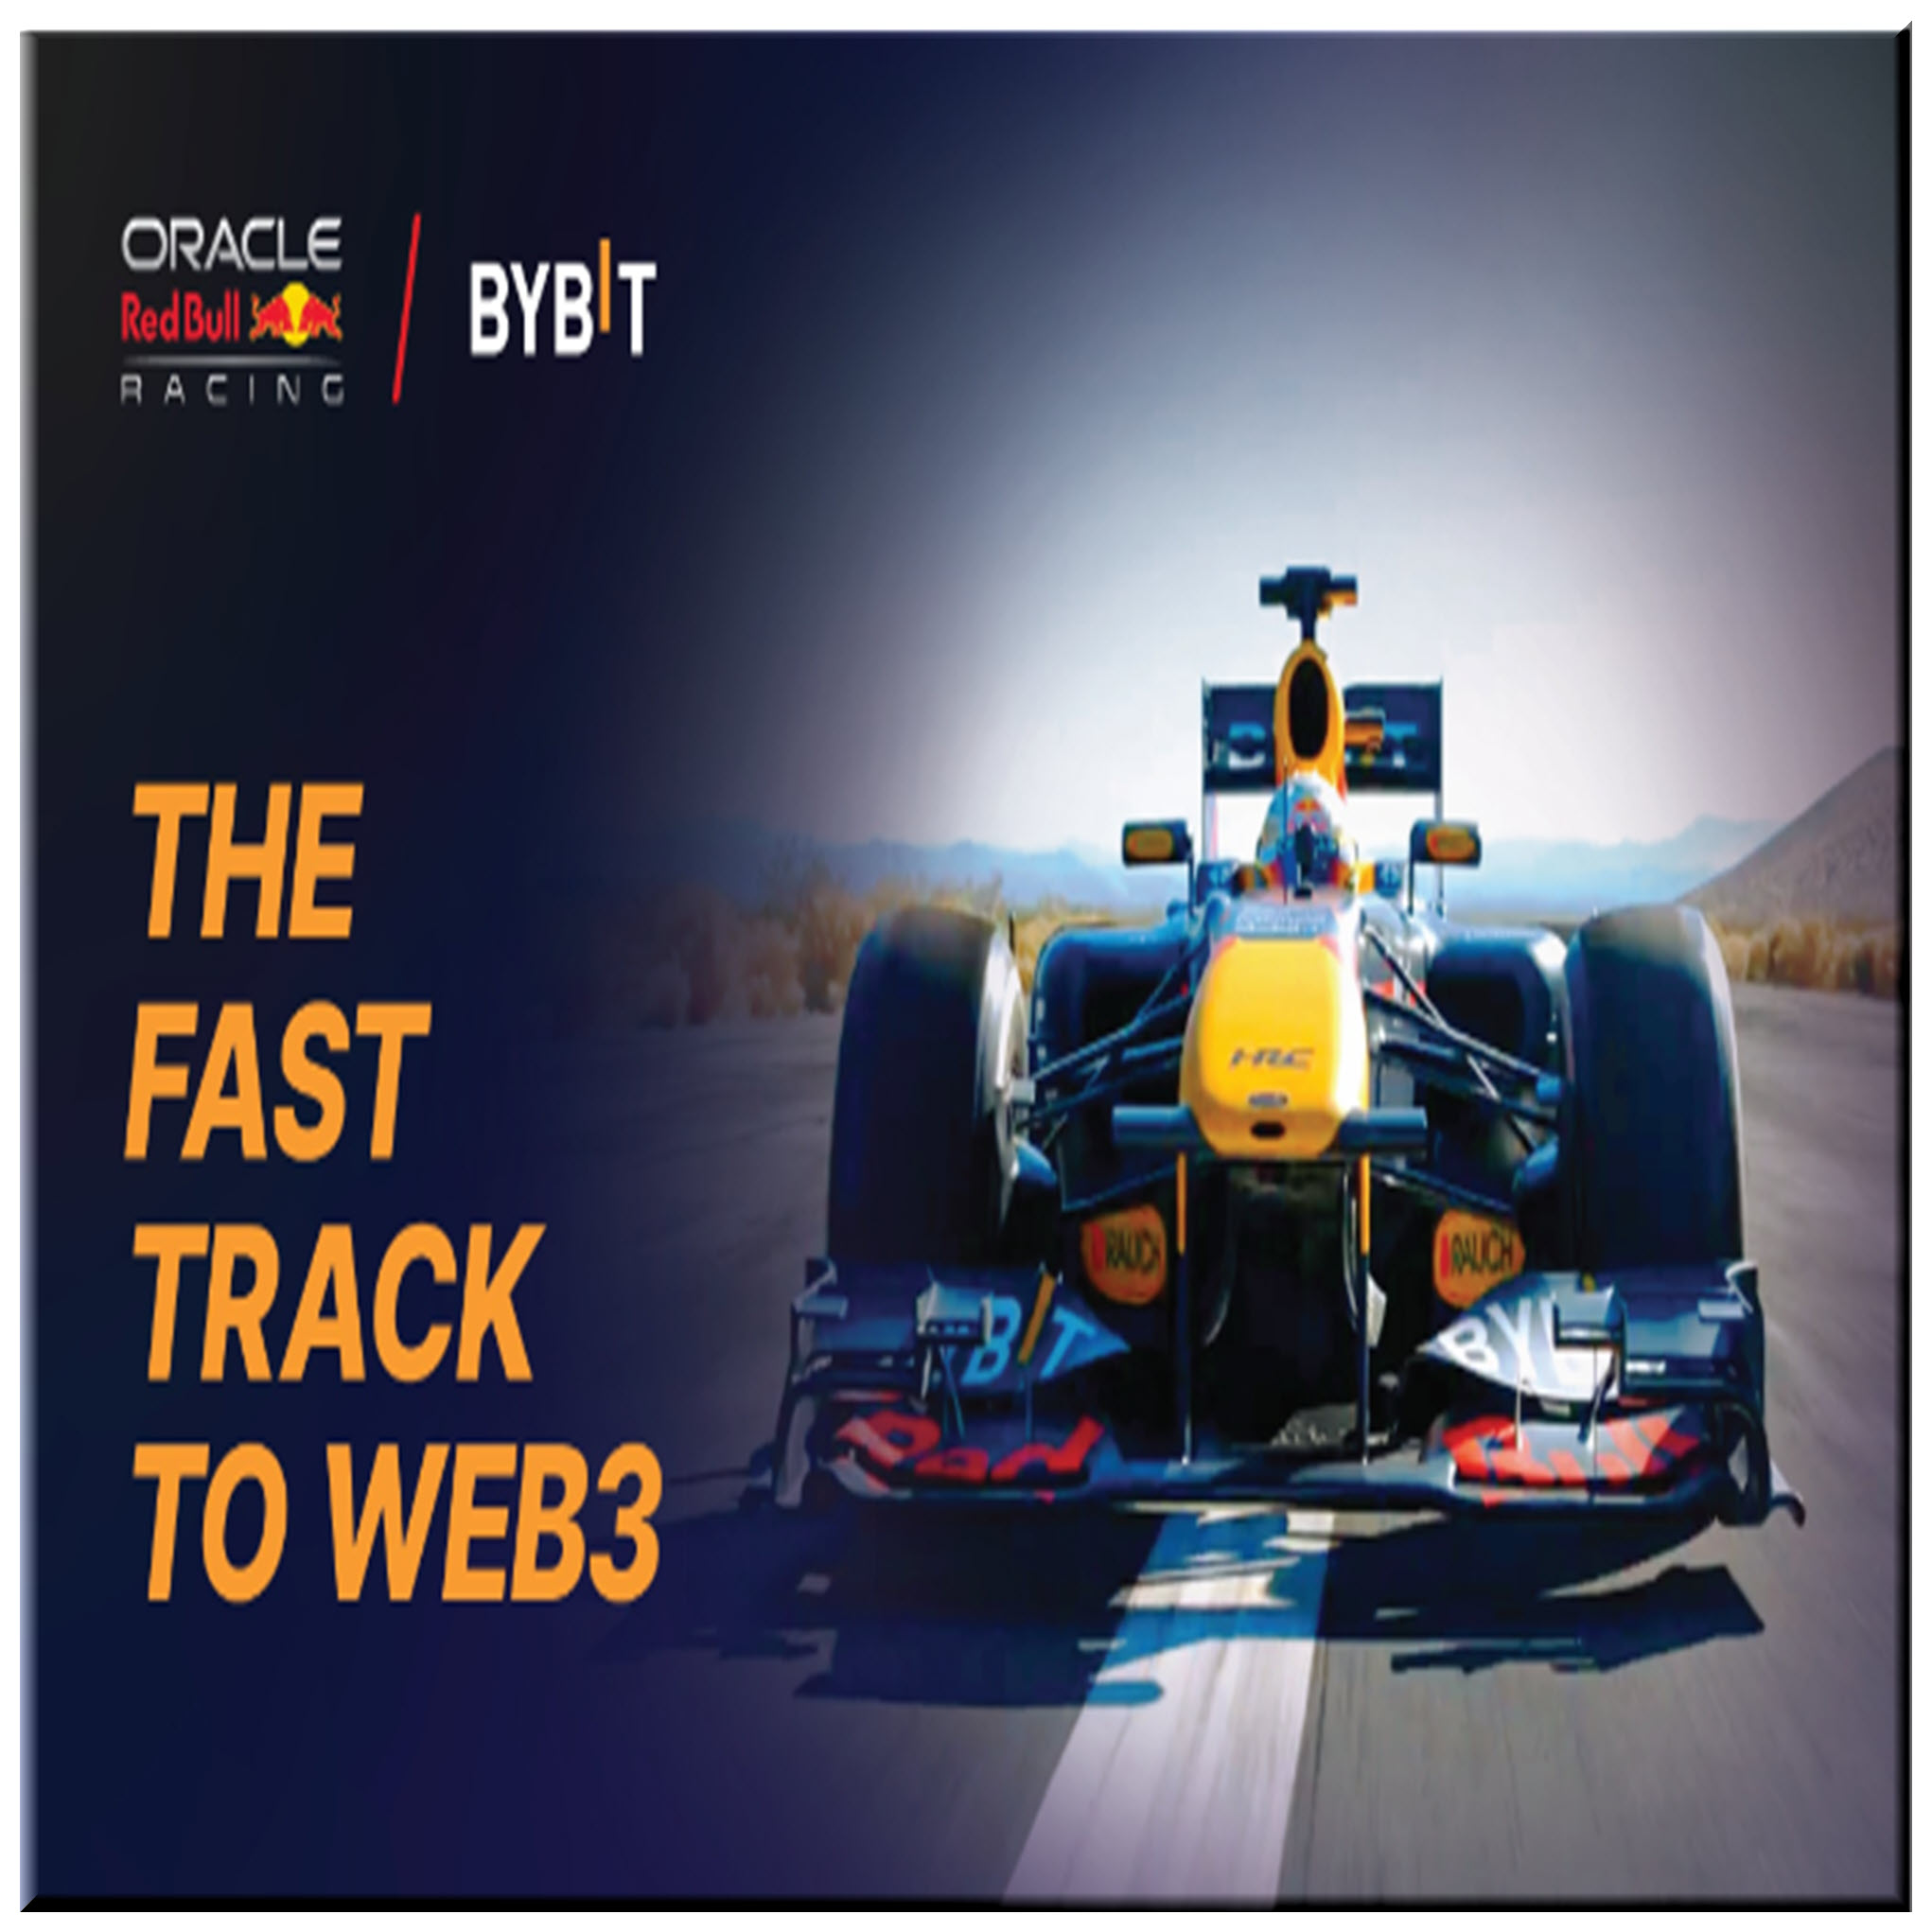 Redbullracing  Race Suit Today! // BYBIT